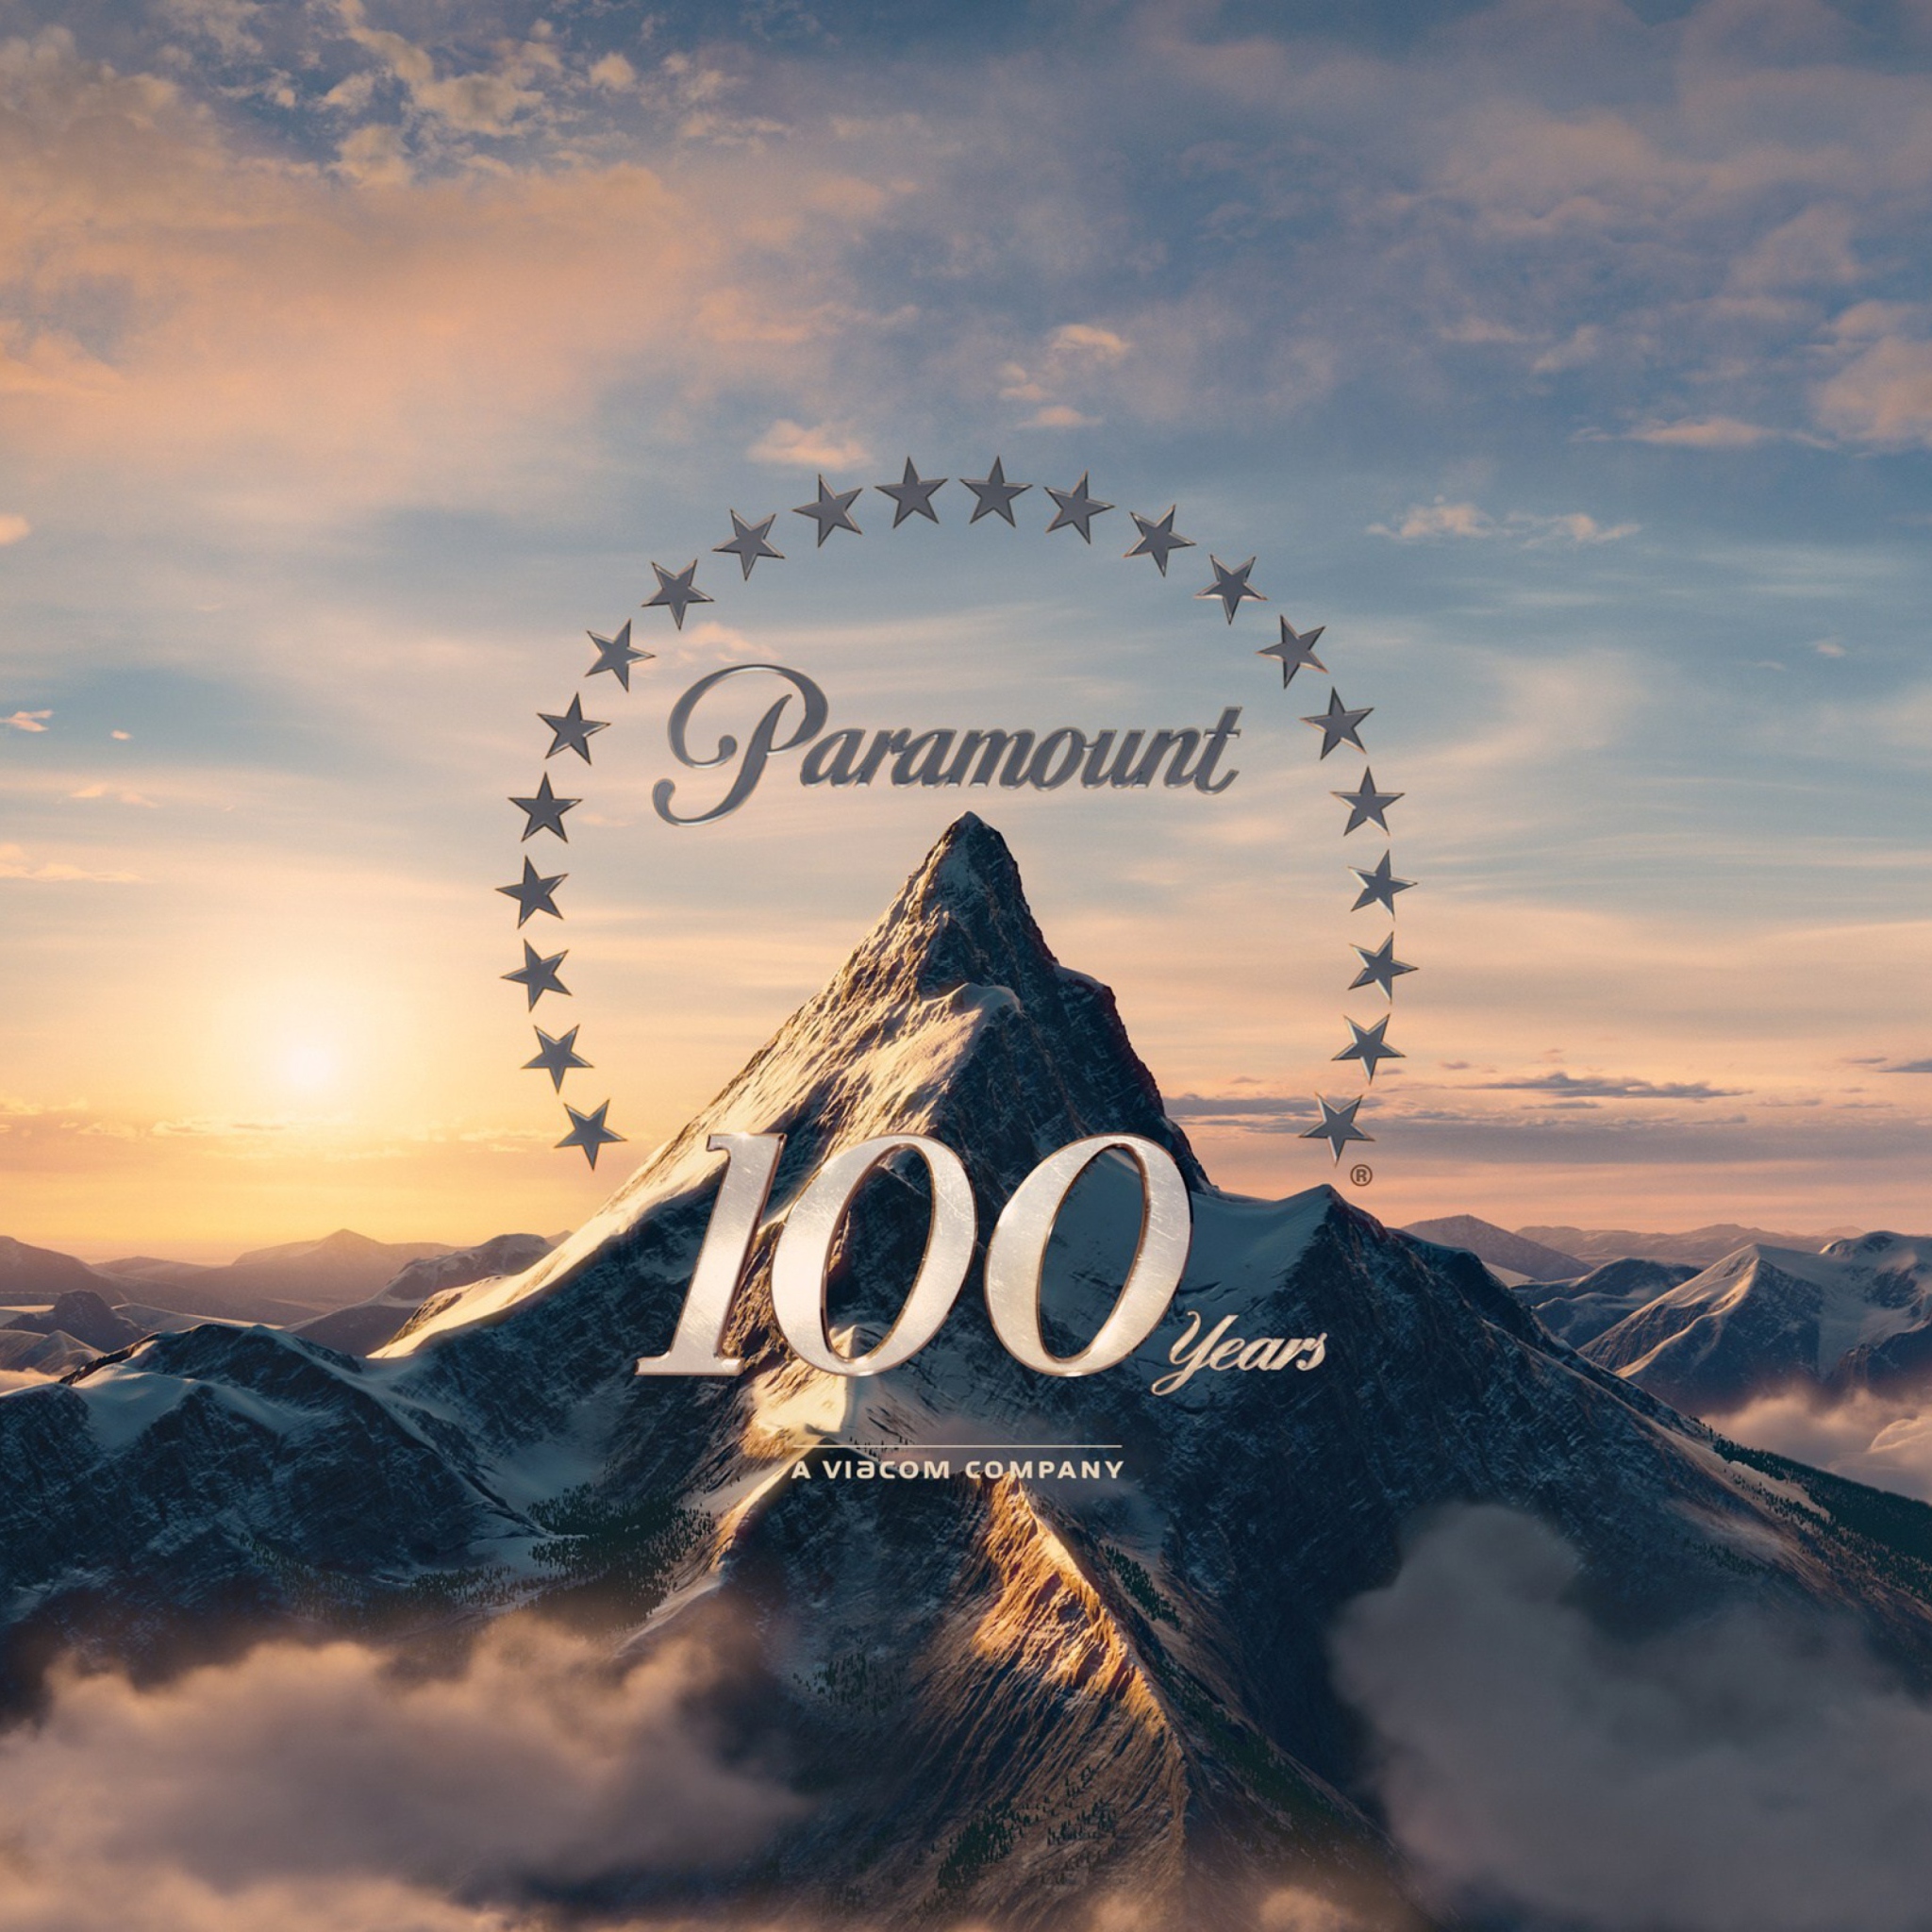 Das Paramount Pictures 100 Years Wallpaper 2048x2048